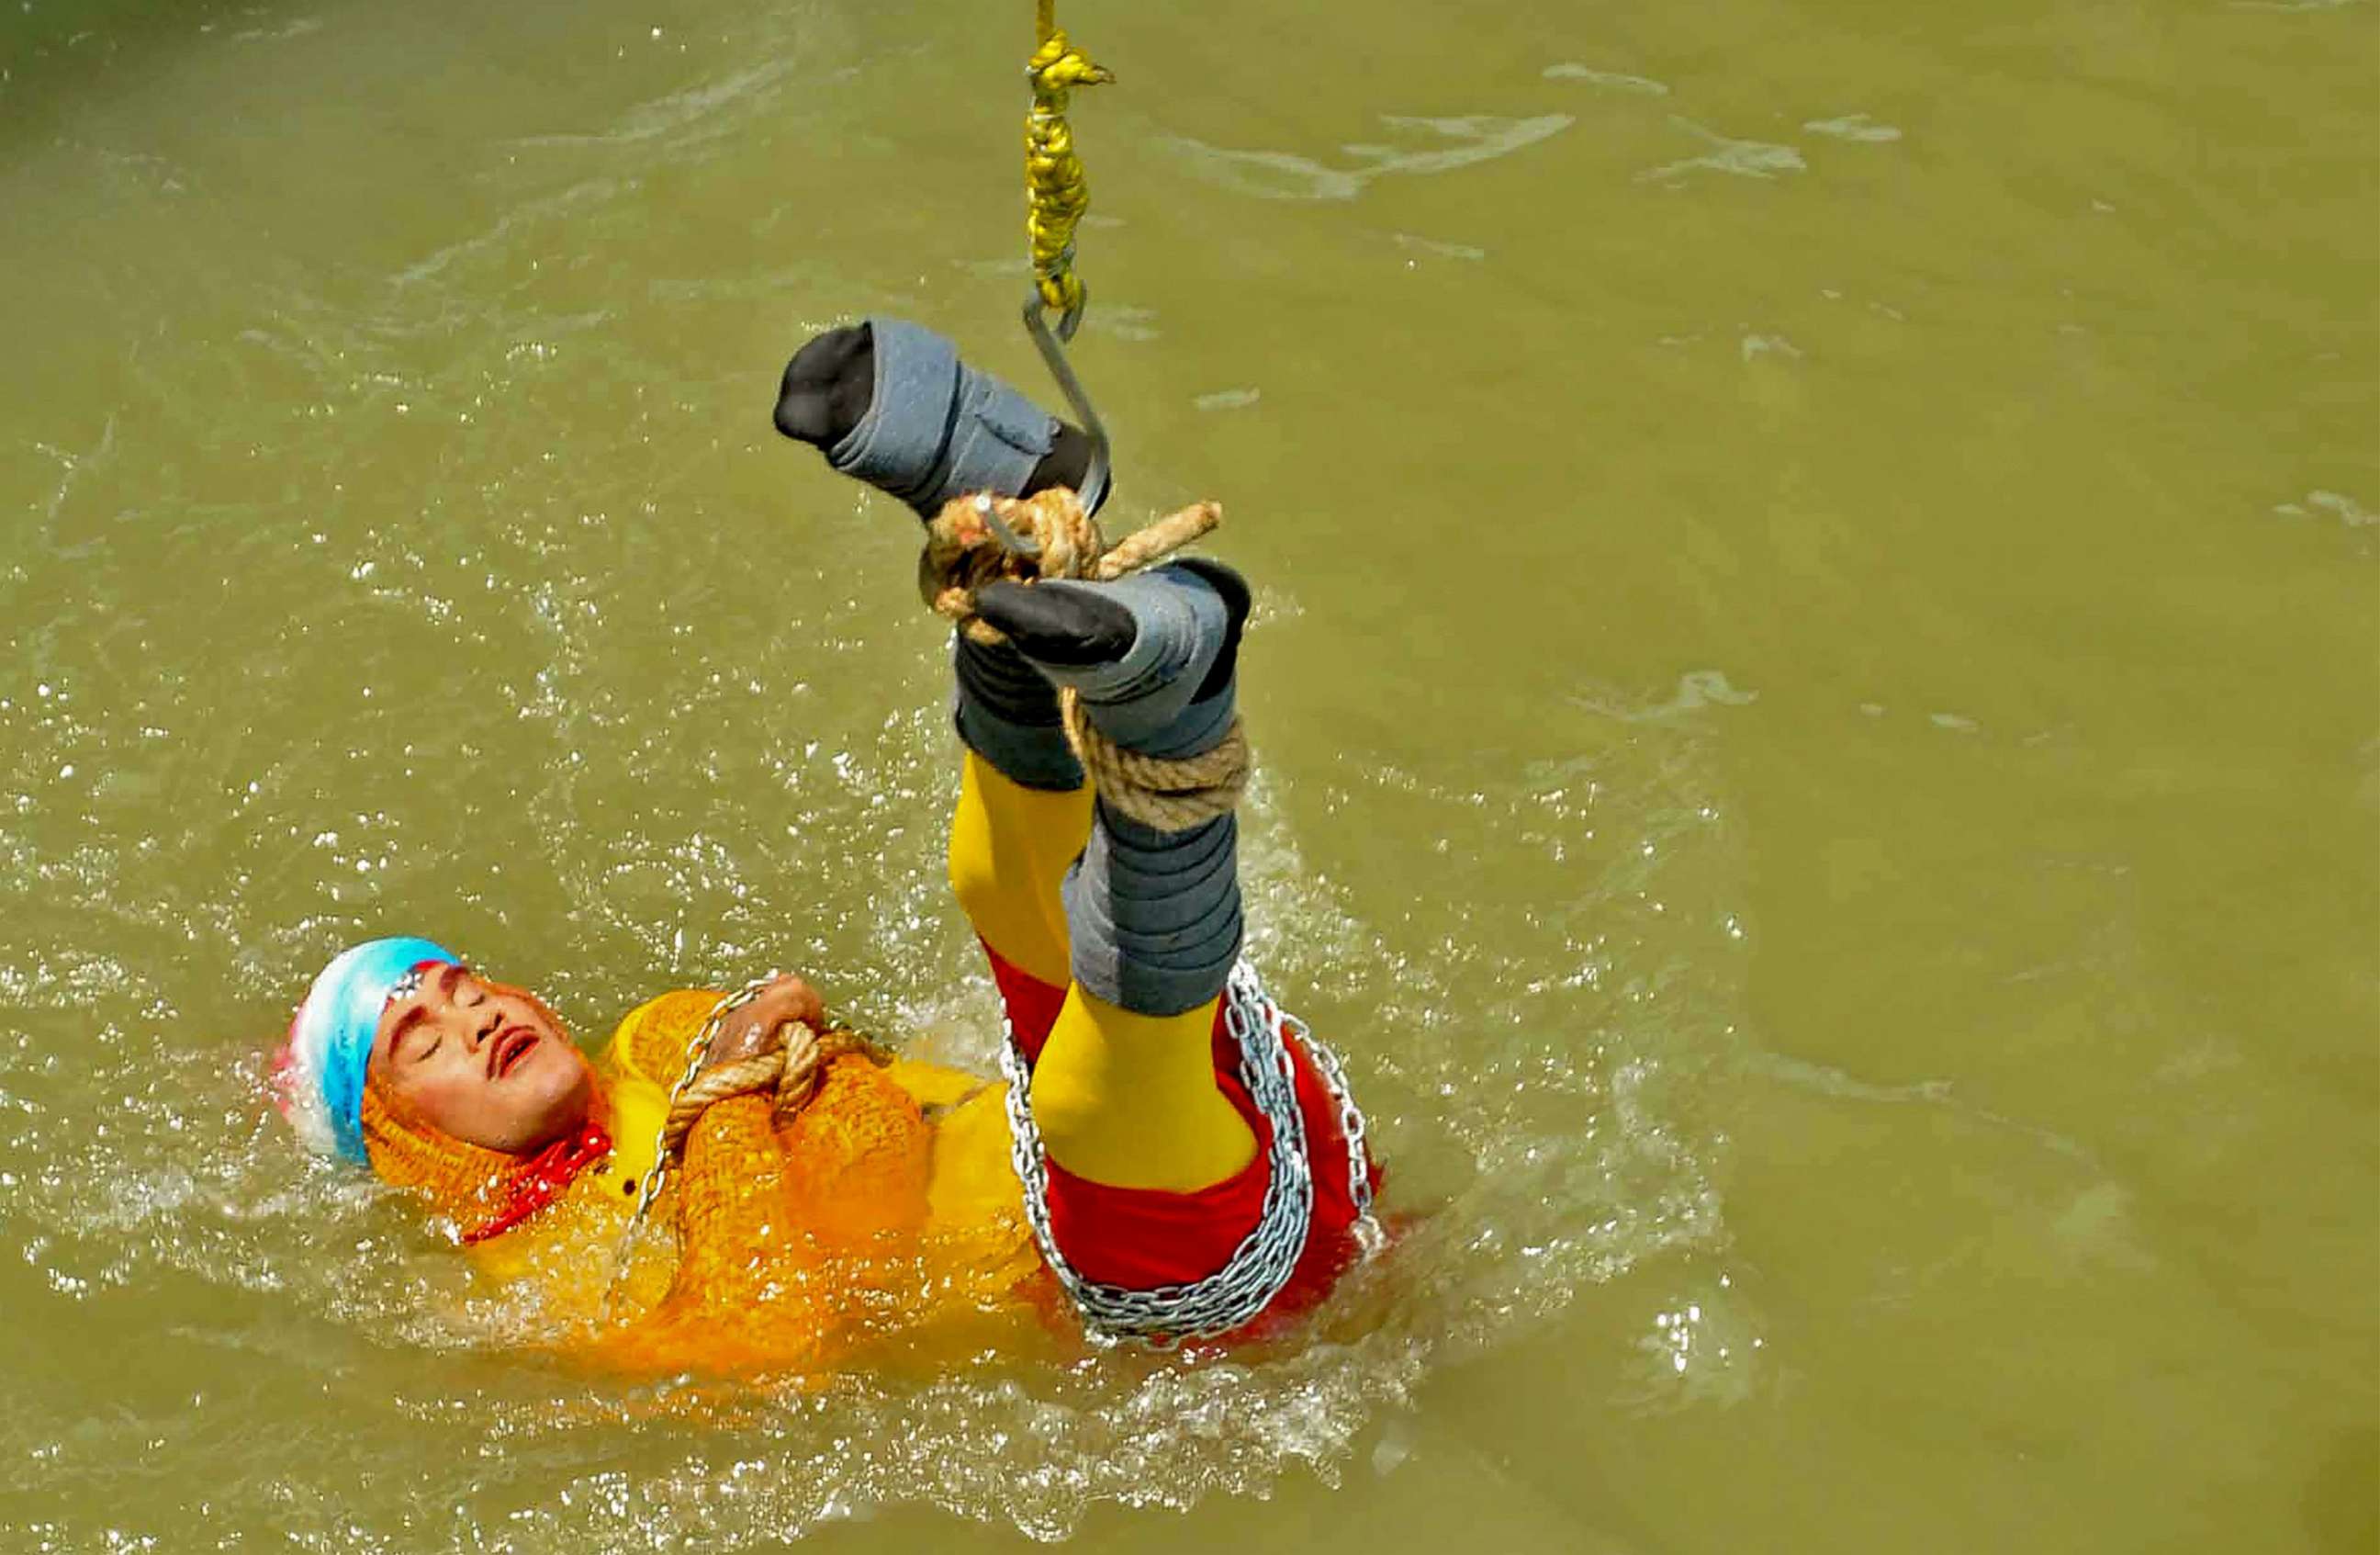 PHOTO:Indian stuntman Chanchal Lahiri, known by his stage name "Jadugar Mandrake", is lowered into the Ganges river, while tied up with steel chains and ropes, in Kolkata, June 16, 2019. 